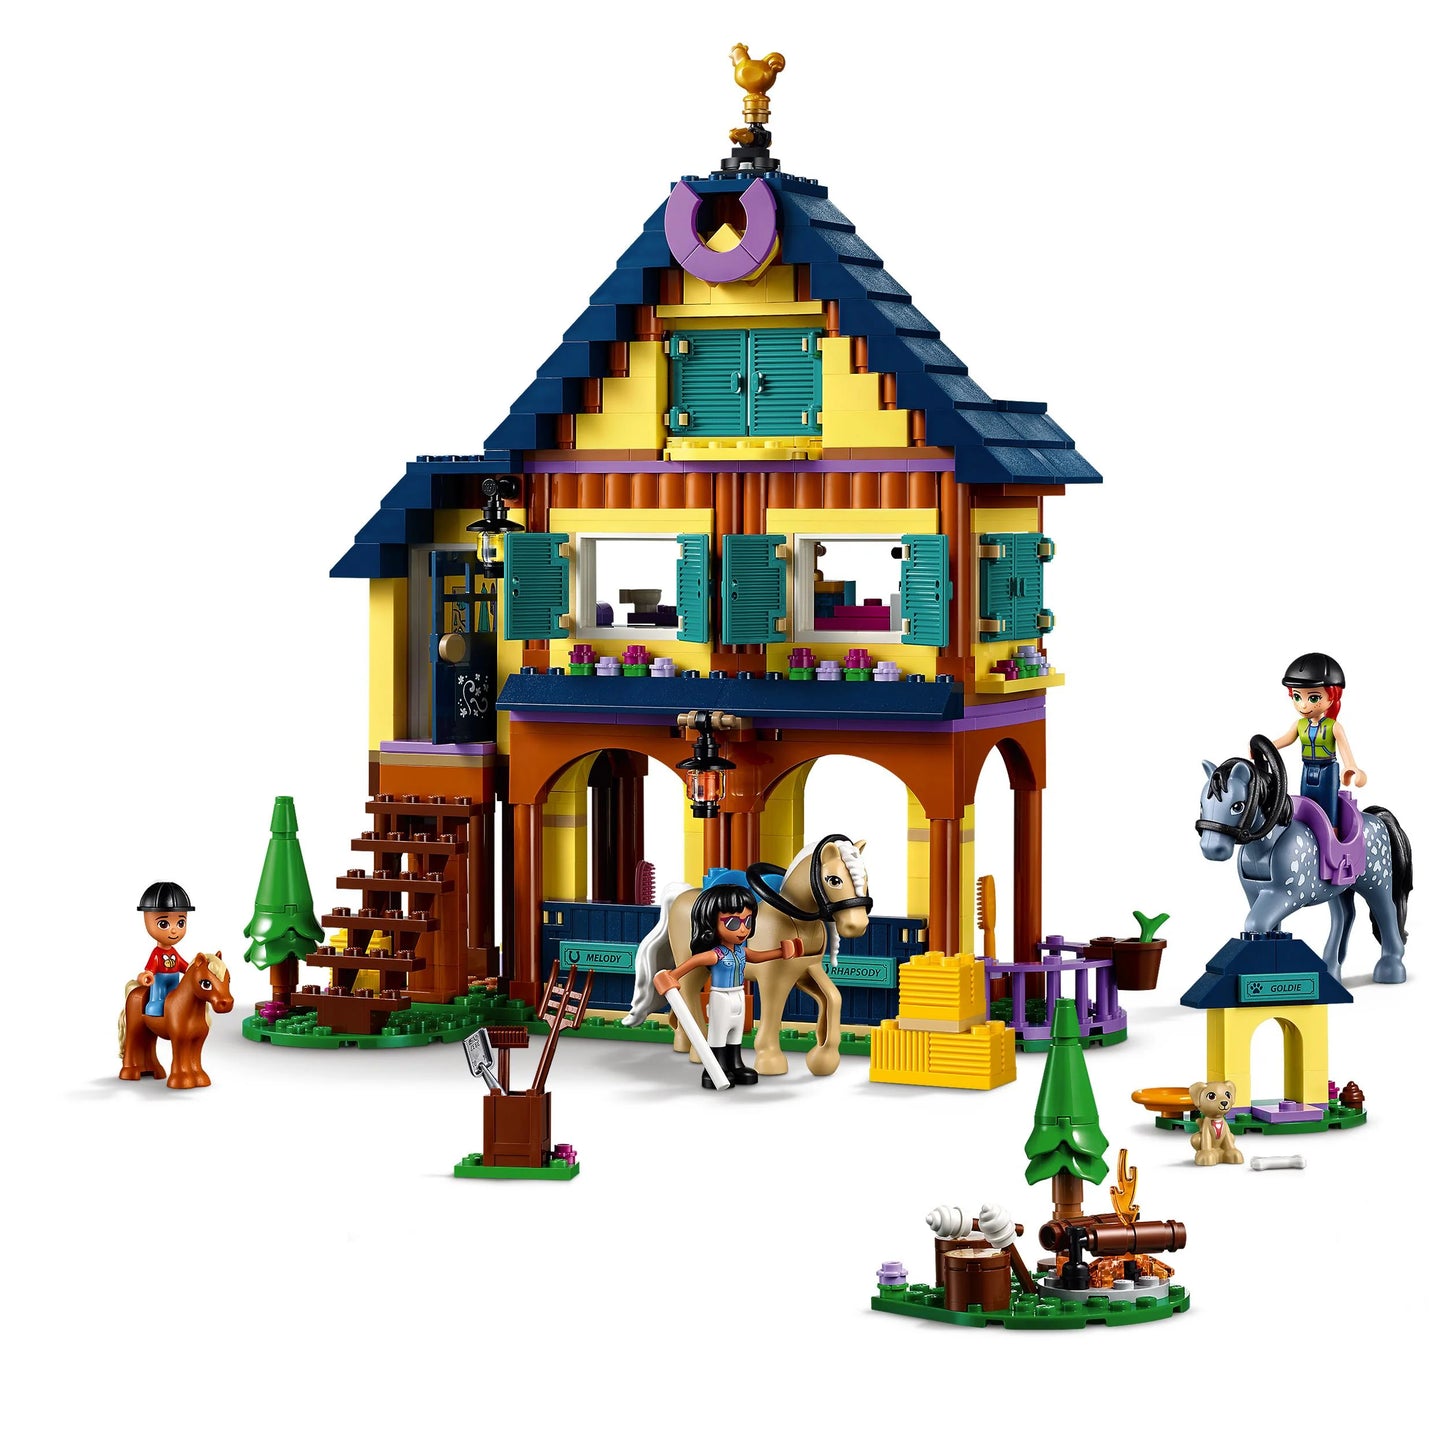 Riding base in the woods - LEGO Friends